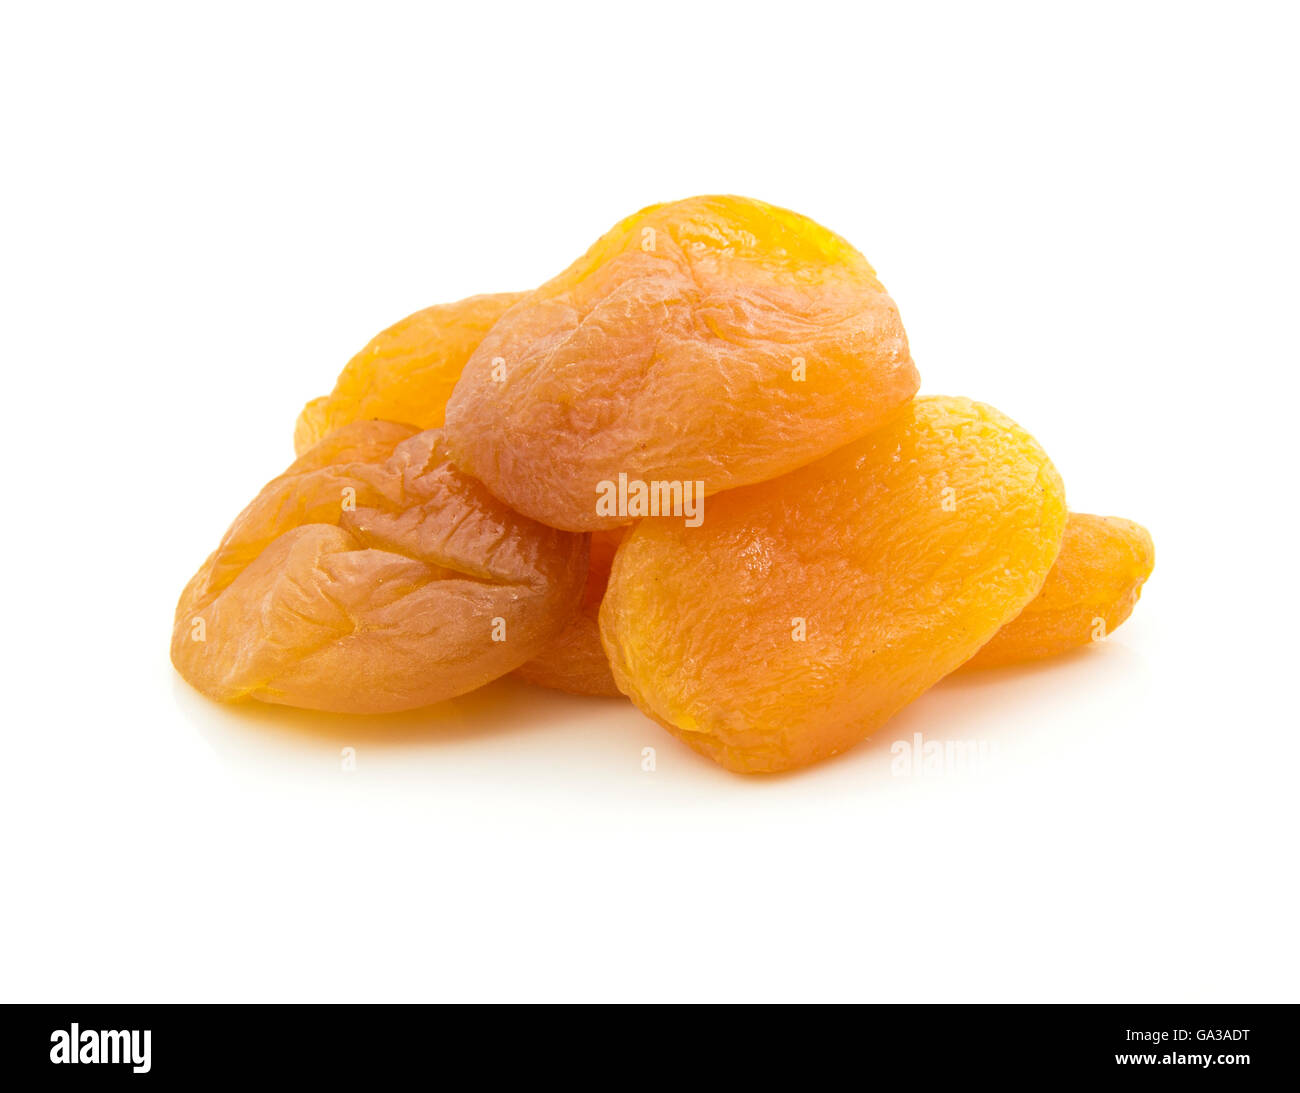 Dried Apricot Fruits Isolated on White Stock Photo